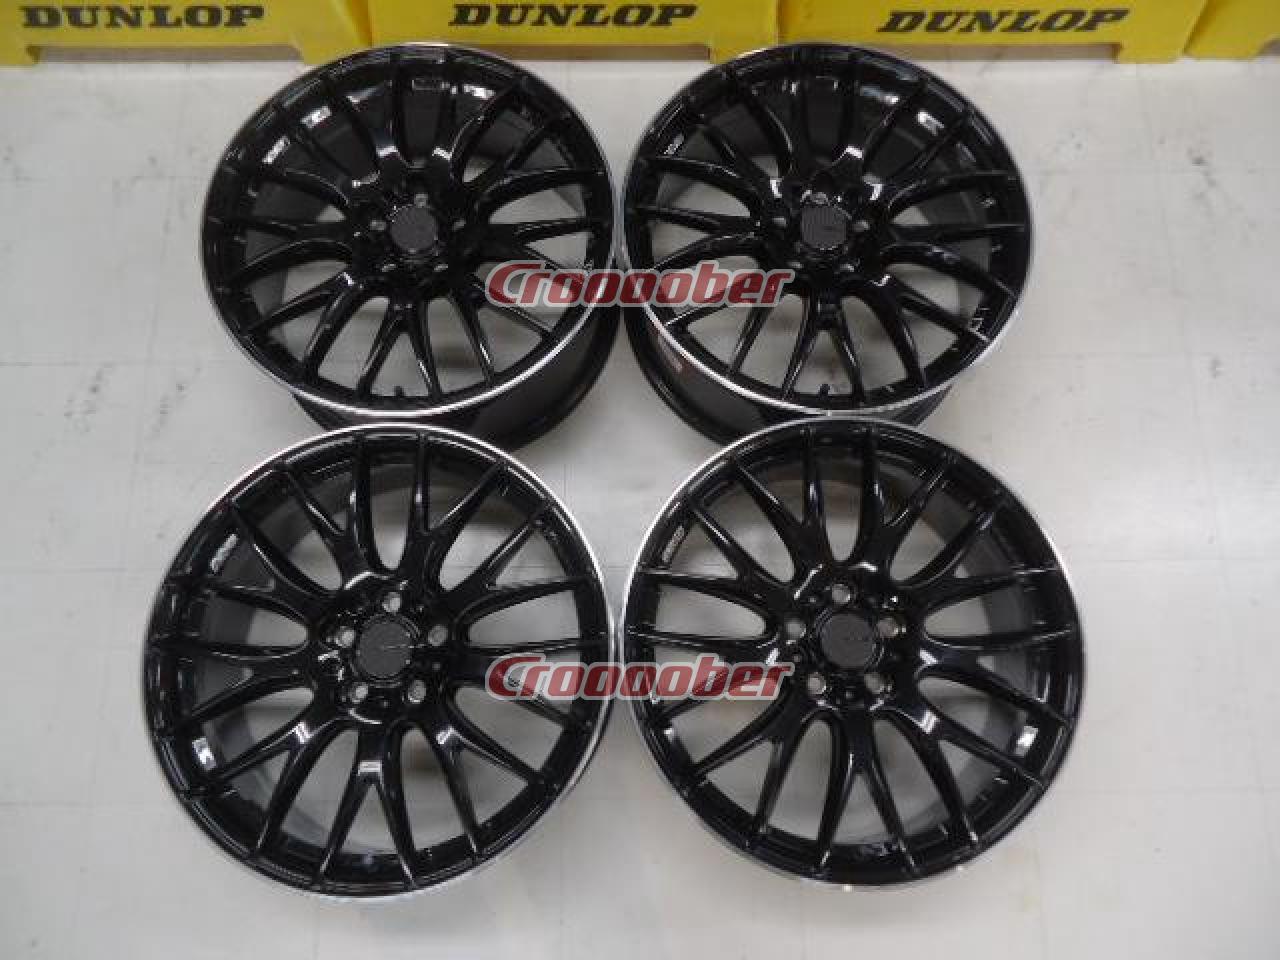 RAYS HOMURA 2 × 9 19 Inches Wheels V10462 - 8.0Jx19+45114.3-5H for